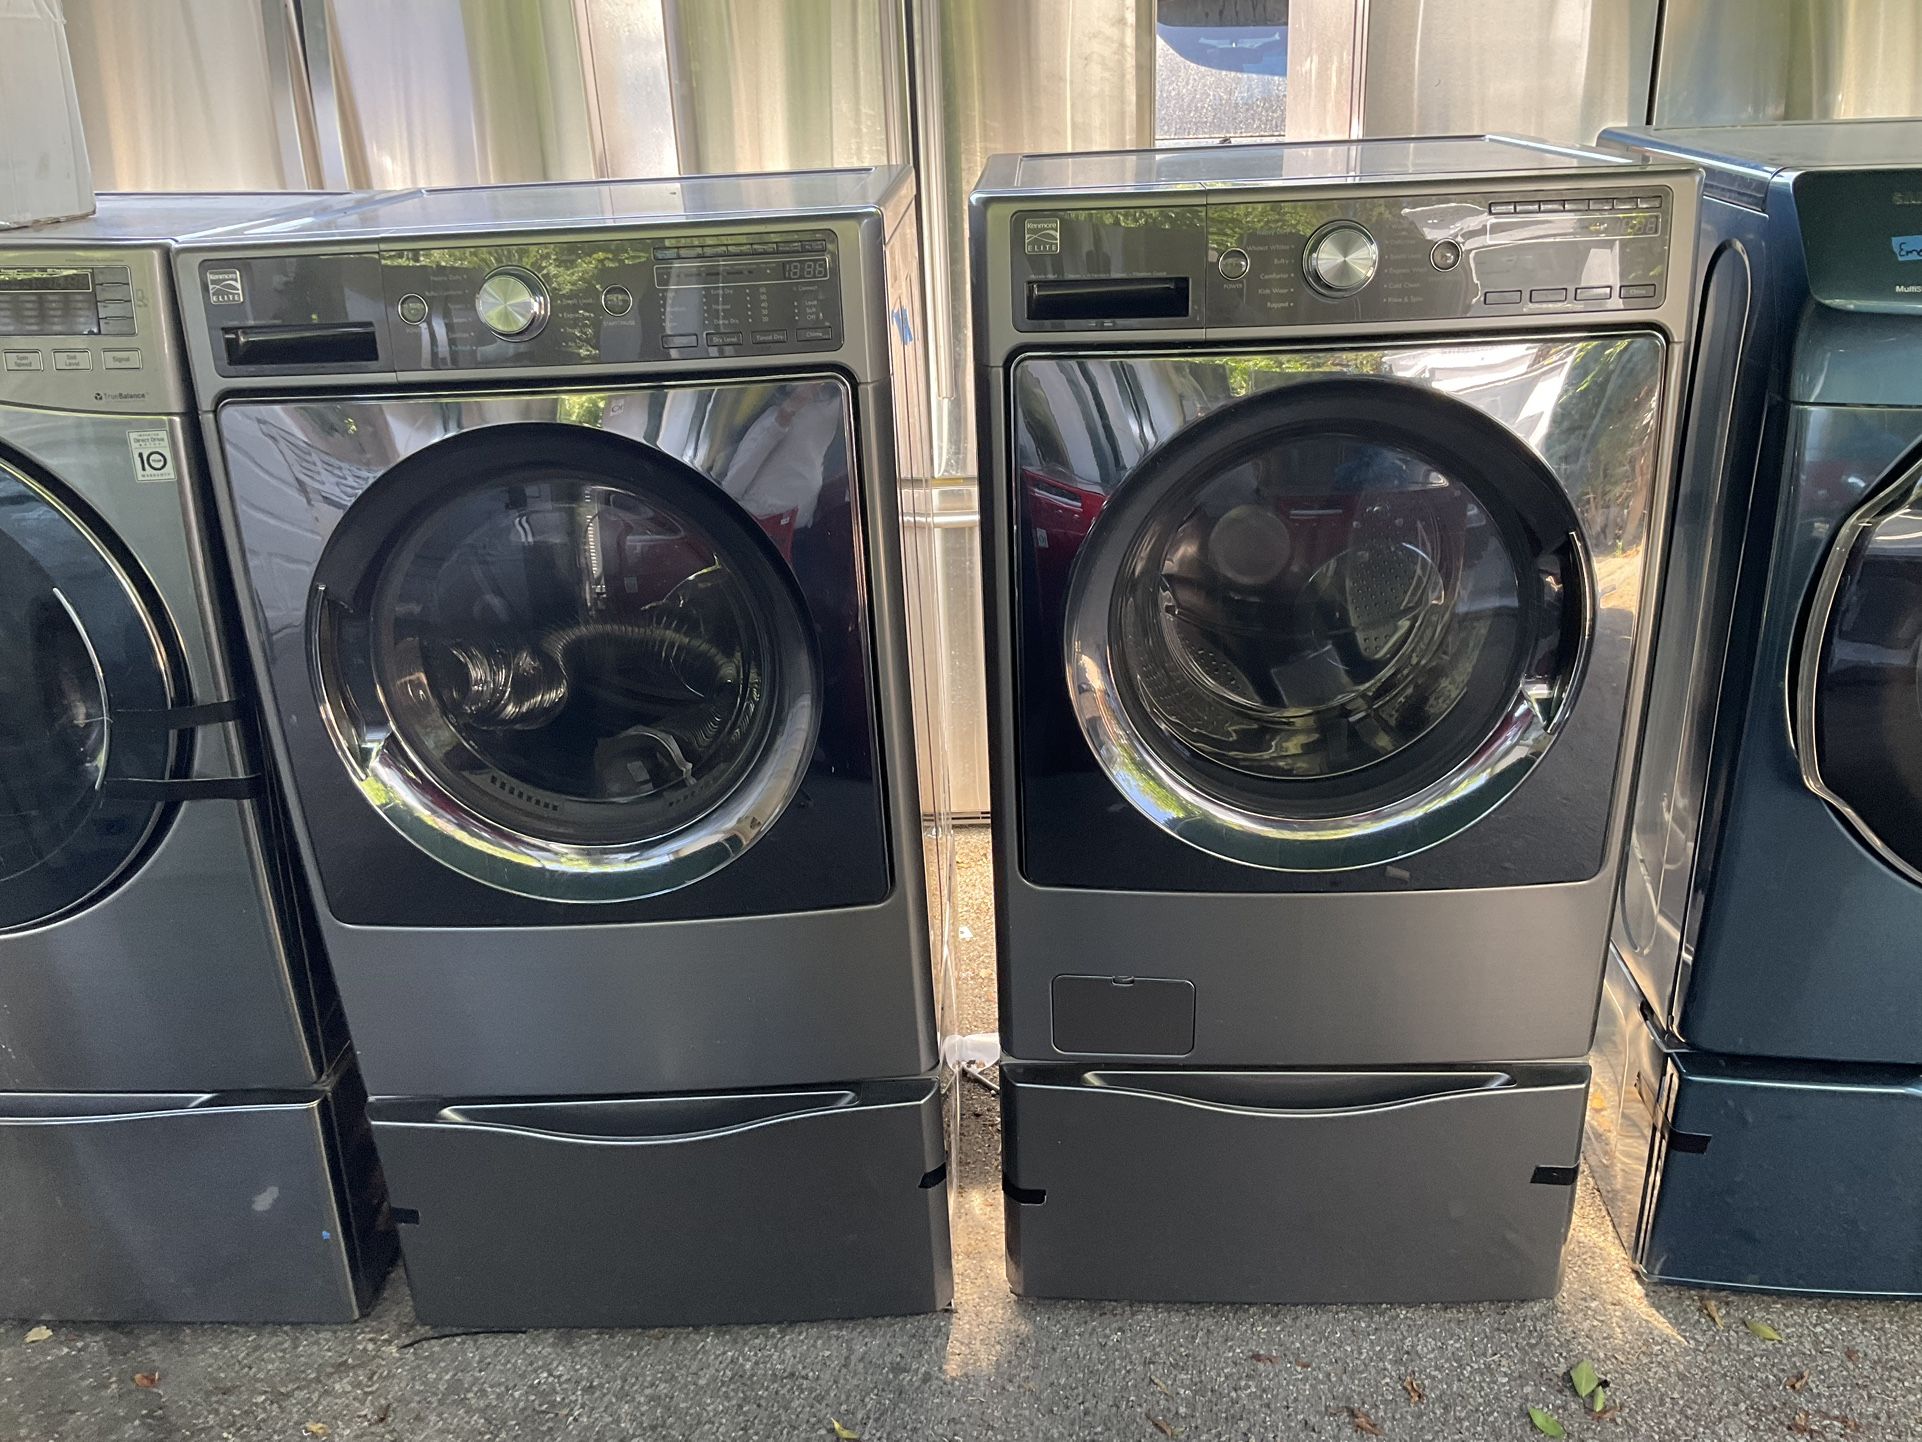 Set Washer and Dryer Gas S Steel 